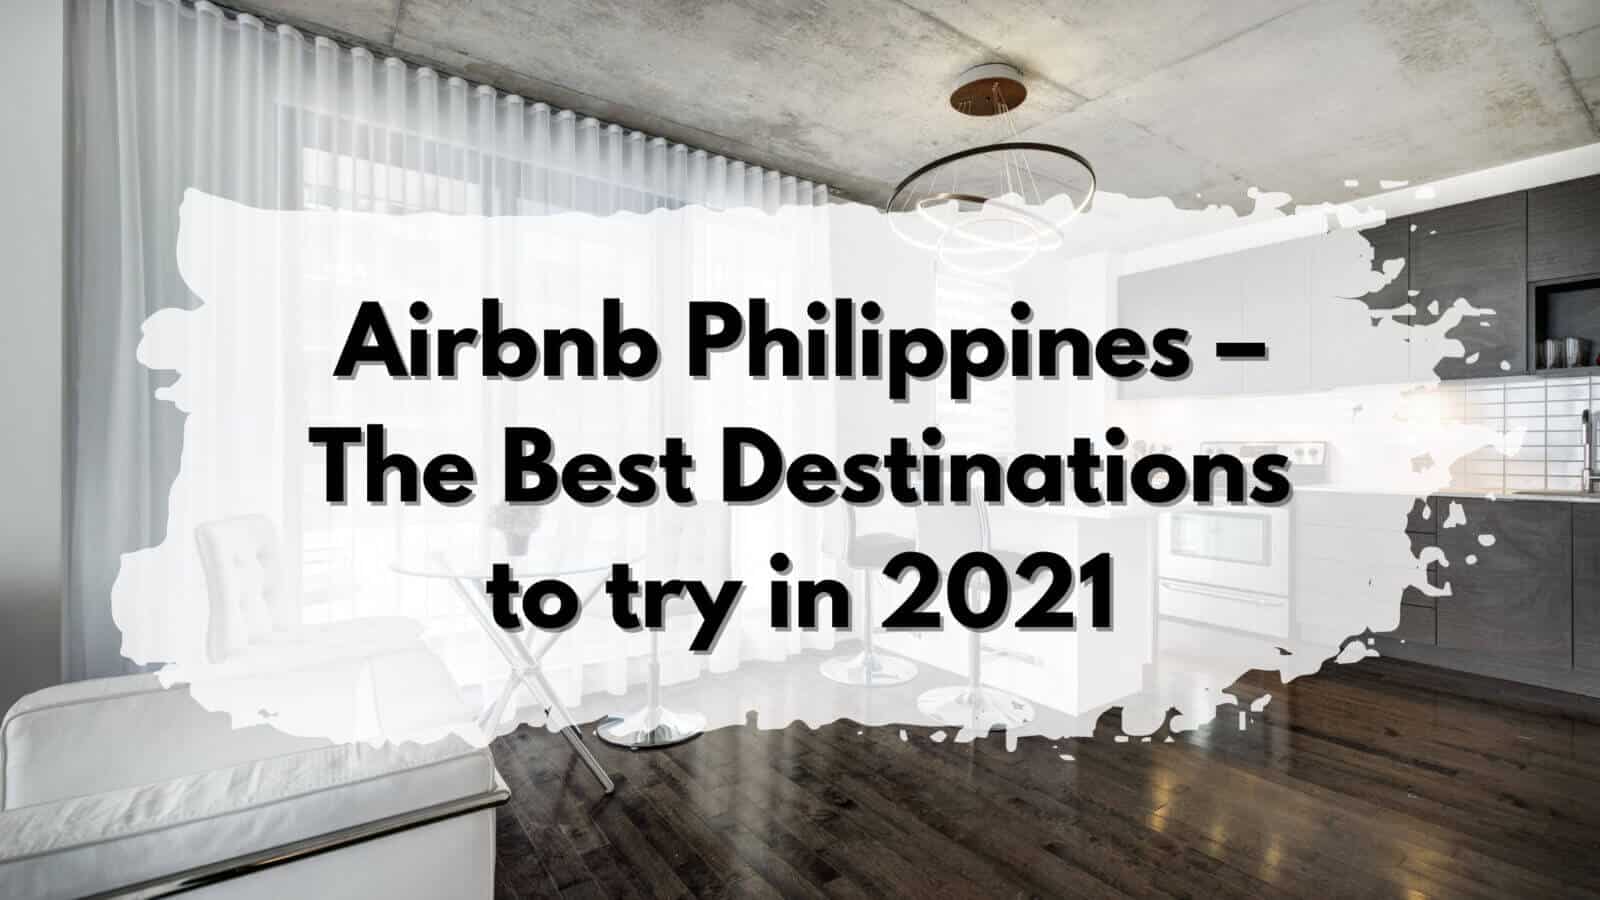 Airbnb Philippines - discover the top destinations to explore in 2021.